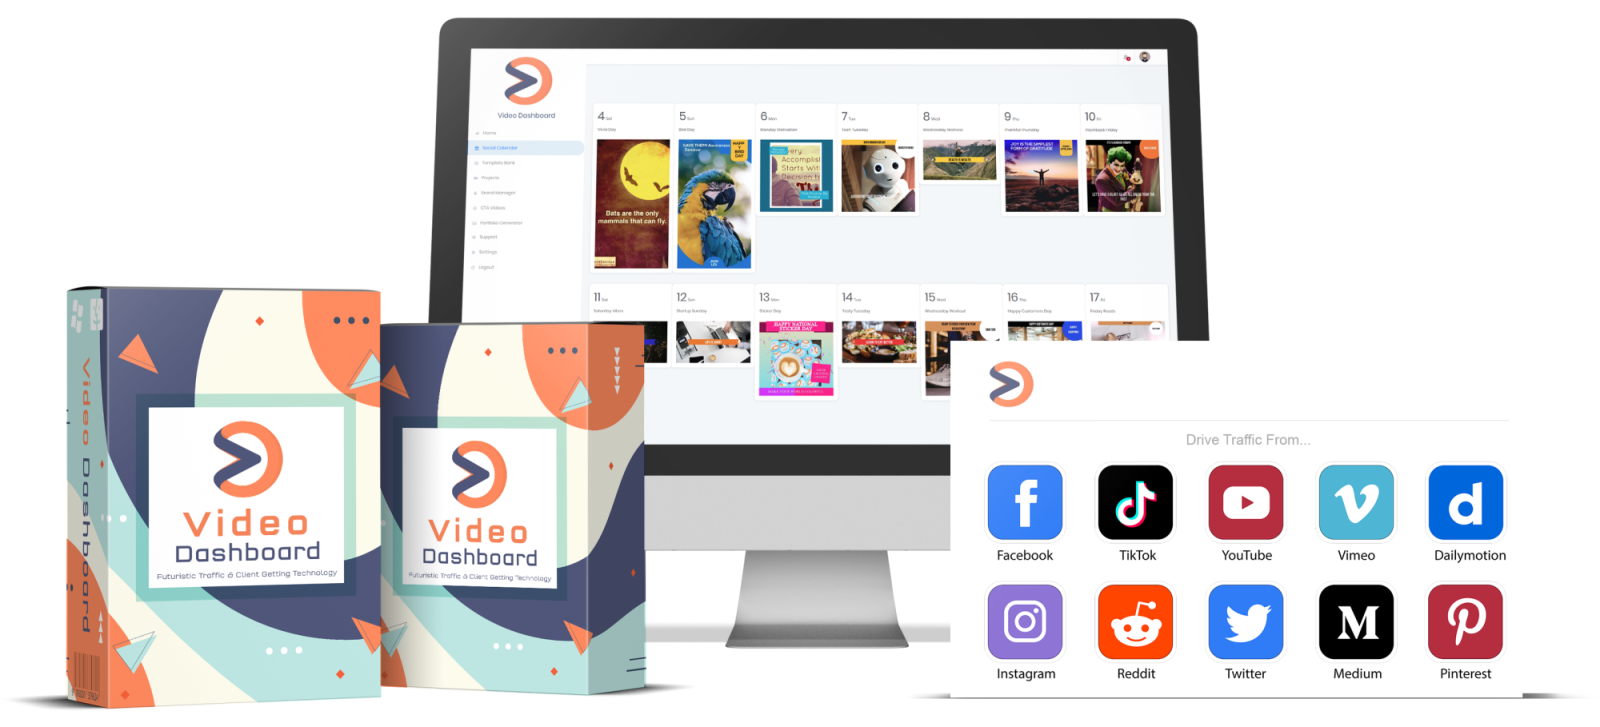 VideoDashboard Review – Leverage Rapidly Growing Social Platforms Like TikTok, Reddit, Medium, LinkedIn and More to Drive Traffic, Leads and Sales Faster Than Ever Before!